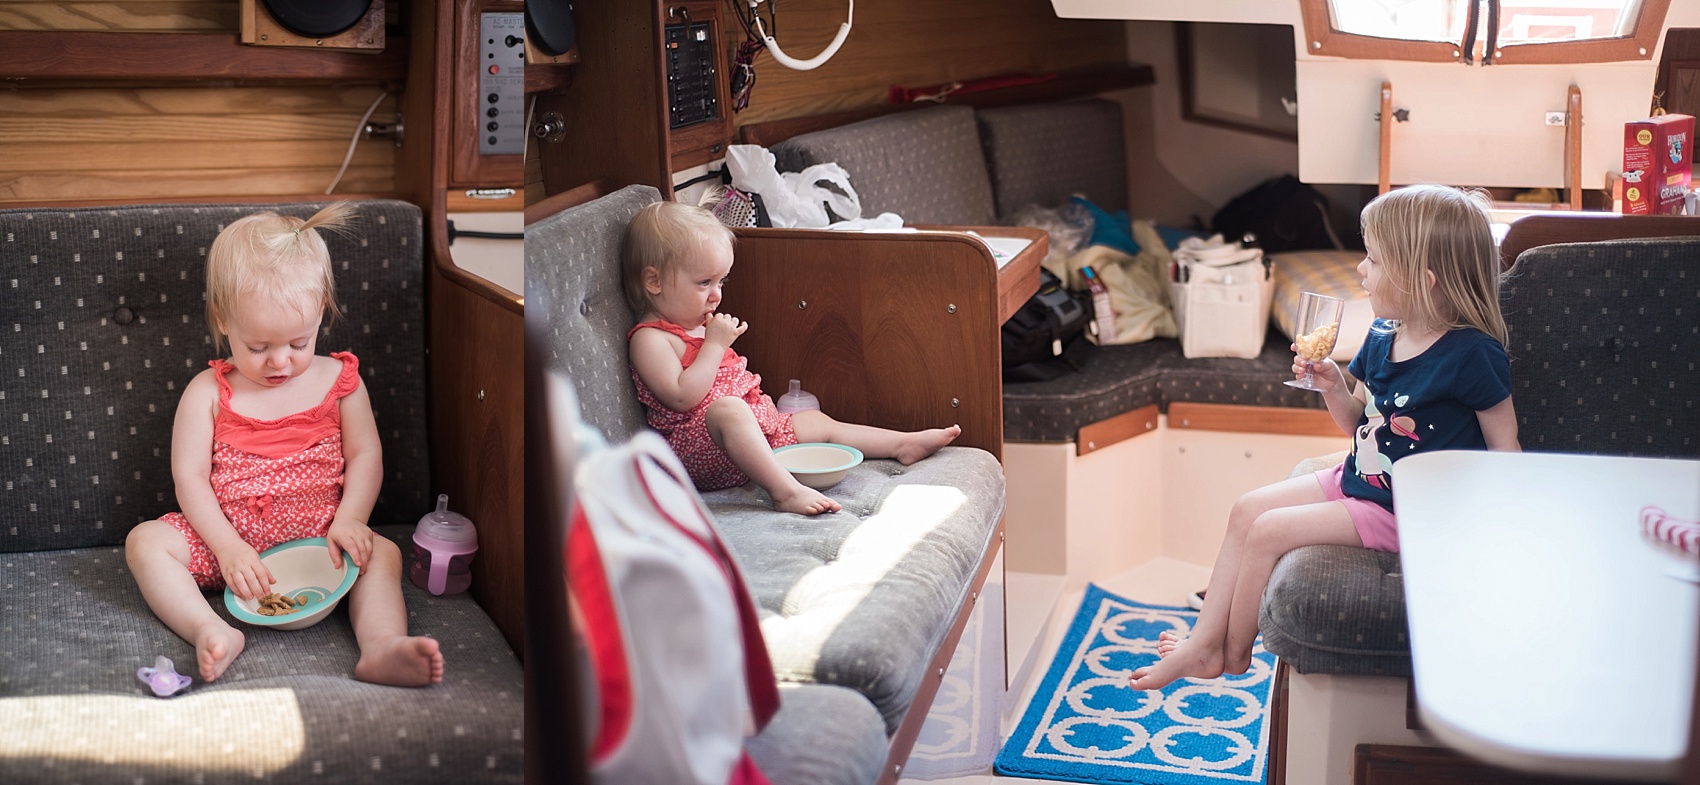 Michigan wedding and lifestyle photographer, Allie Siarto, shares a photo of her young daughters snacking in the cabin of a Catalina 30 sailboat